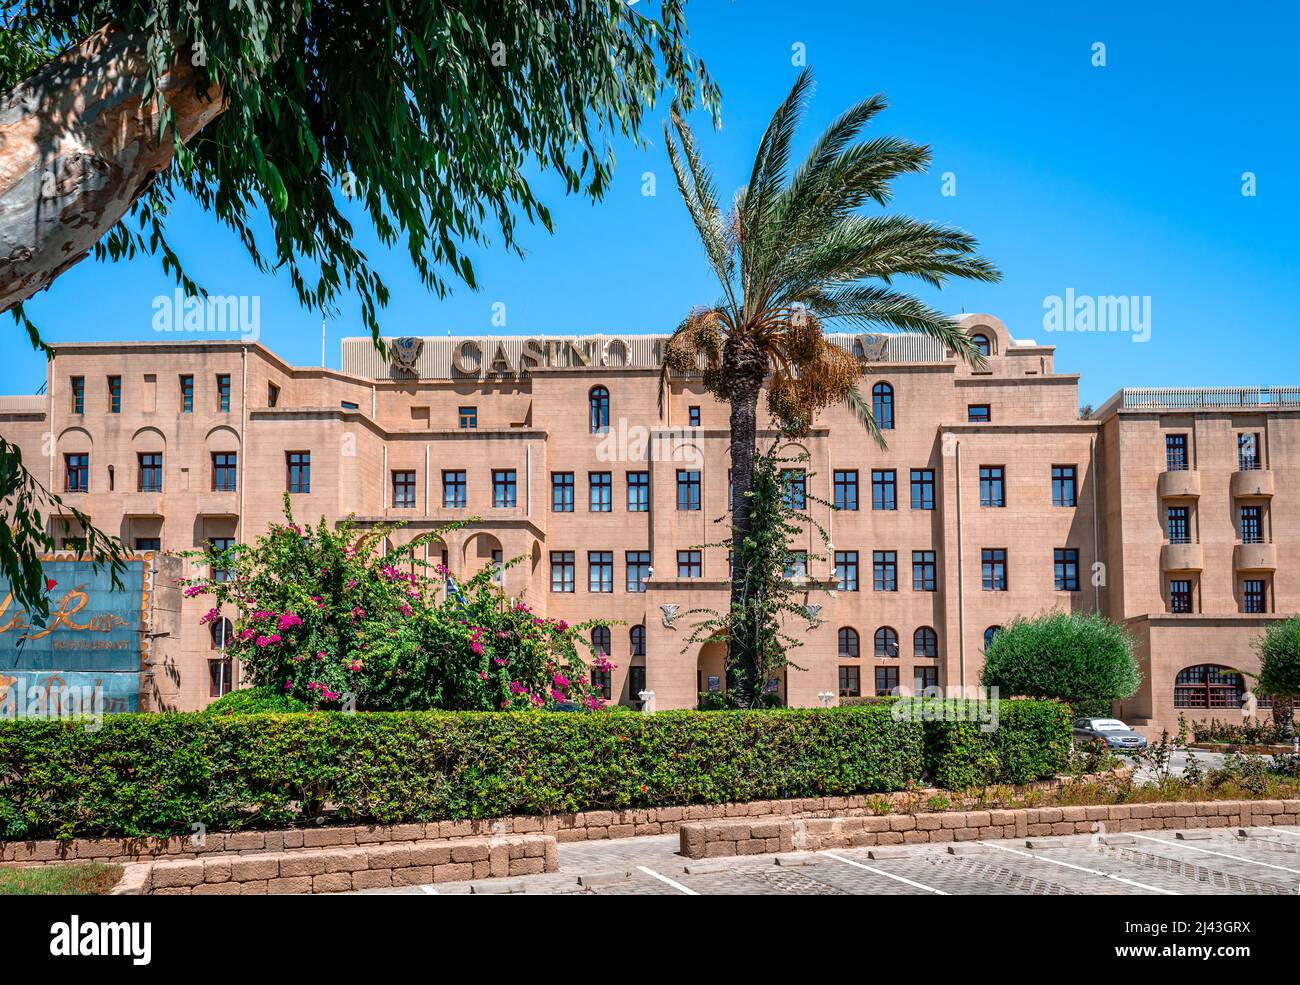 View of Grande Albergo delle Rose (Grand Hotel of Roses), a seaside luxurious hotel in the center of the city of Rhodes, Greece, housing the Casino. Stock Photo